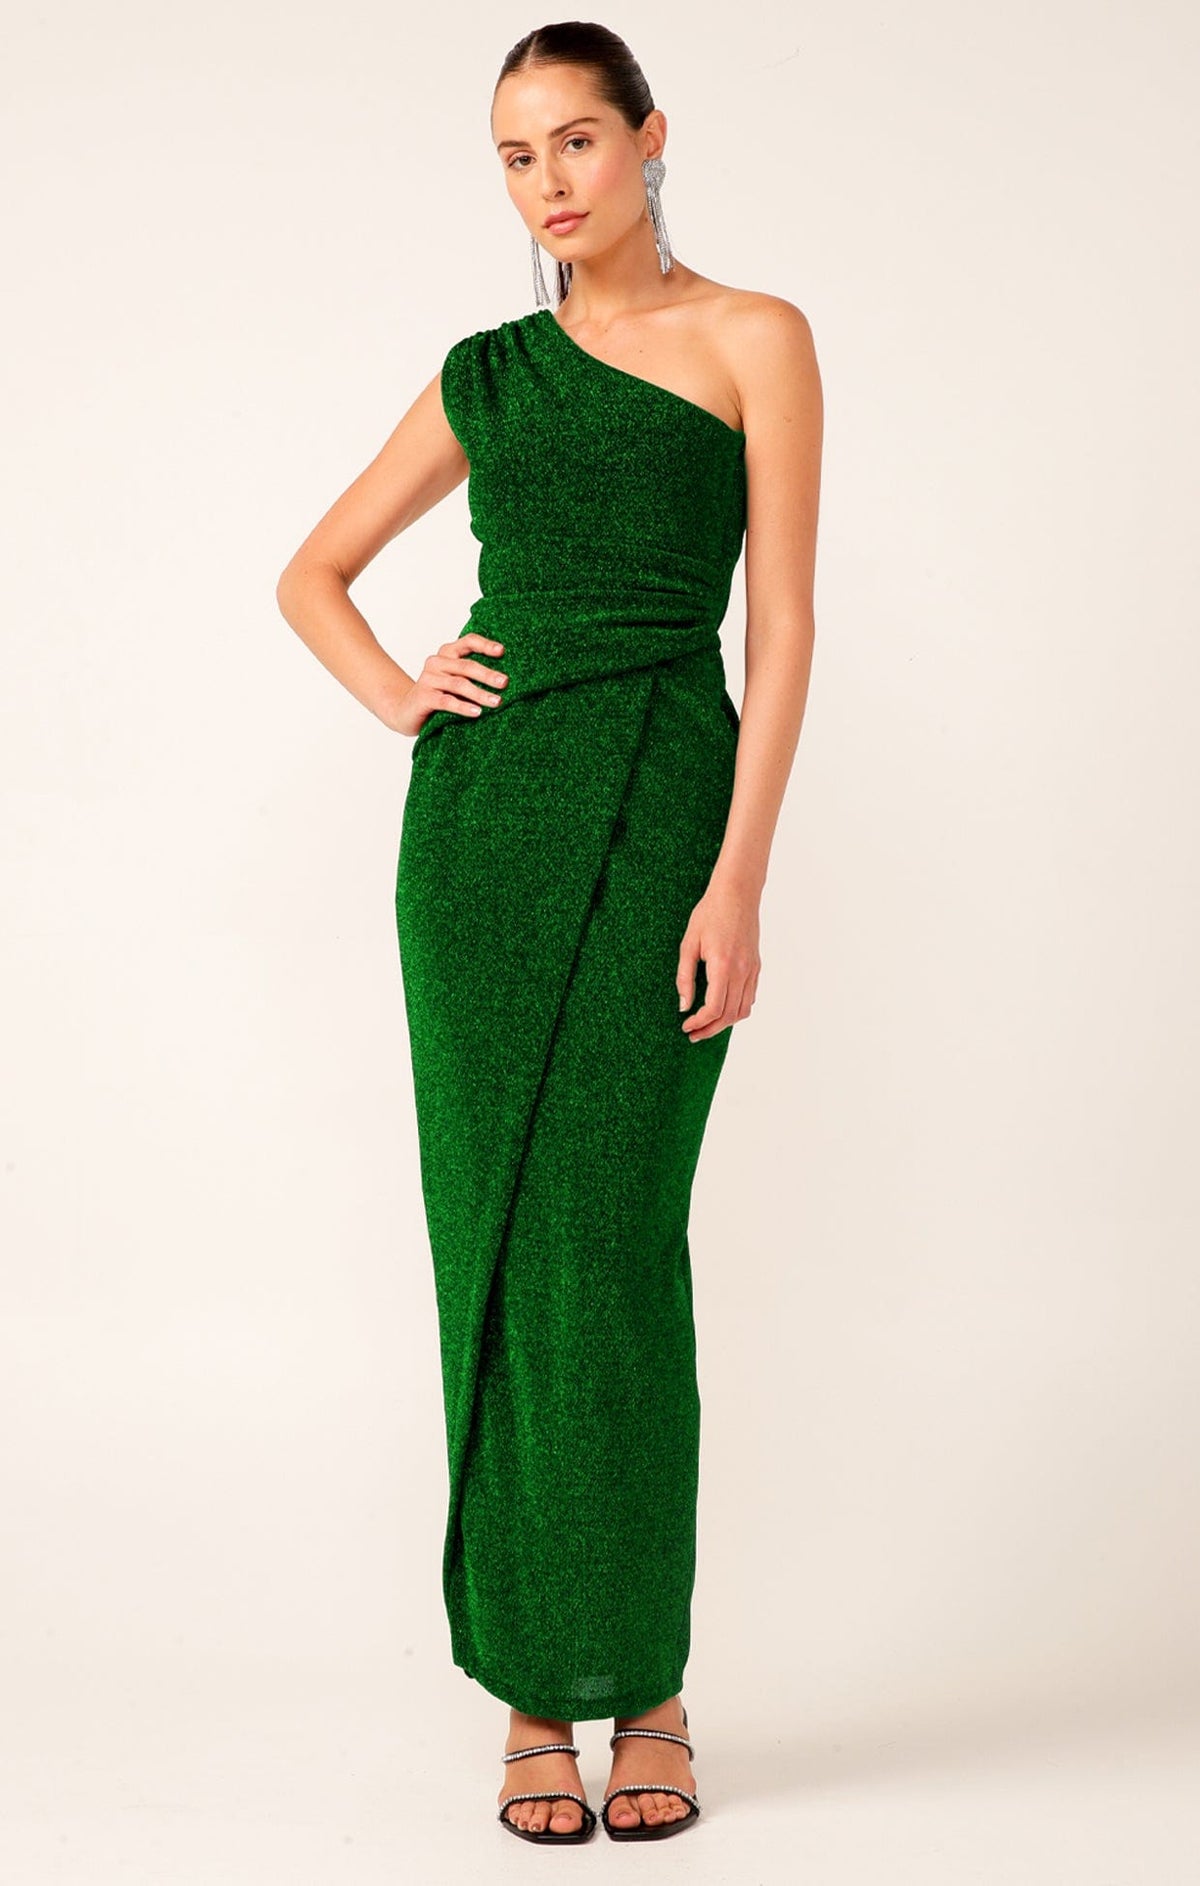 Dresses Events VALEDICTORY DRESS IN EMERALD